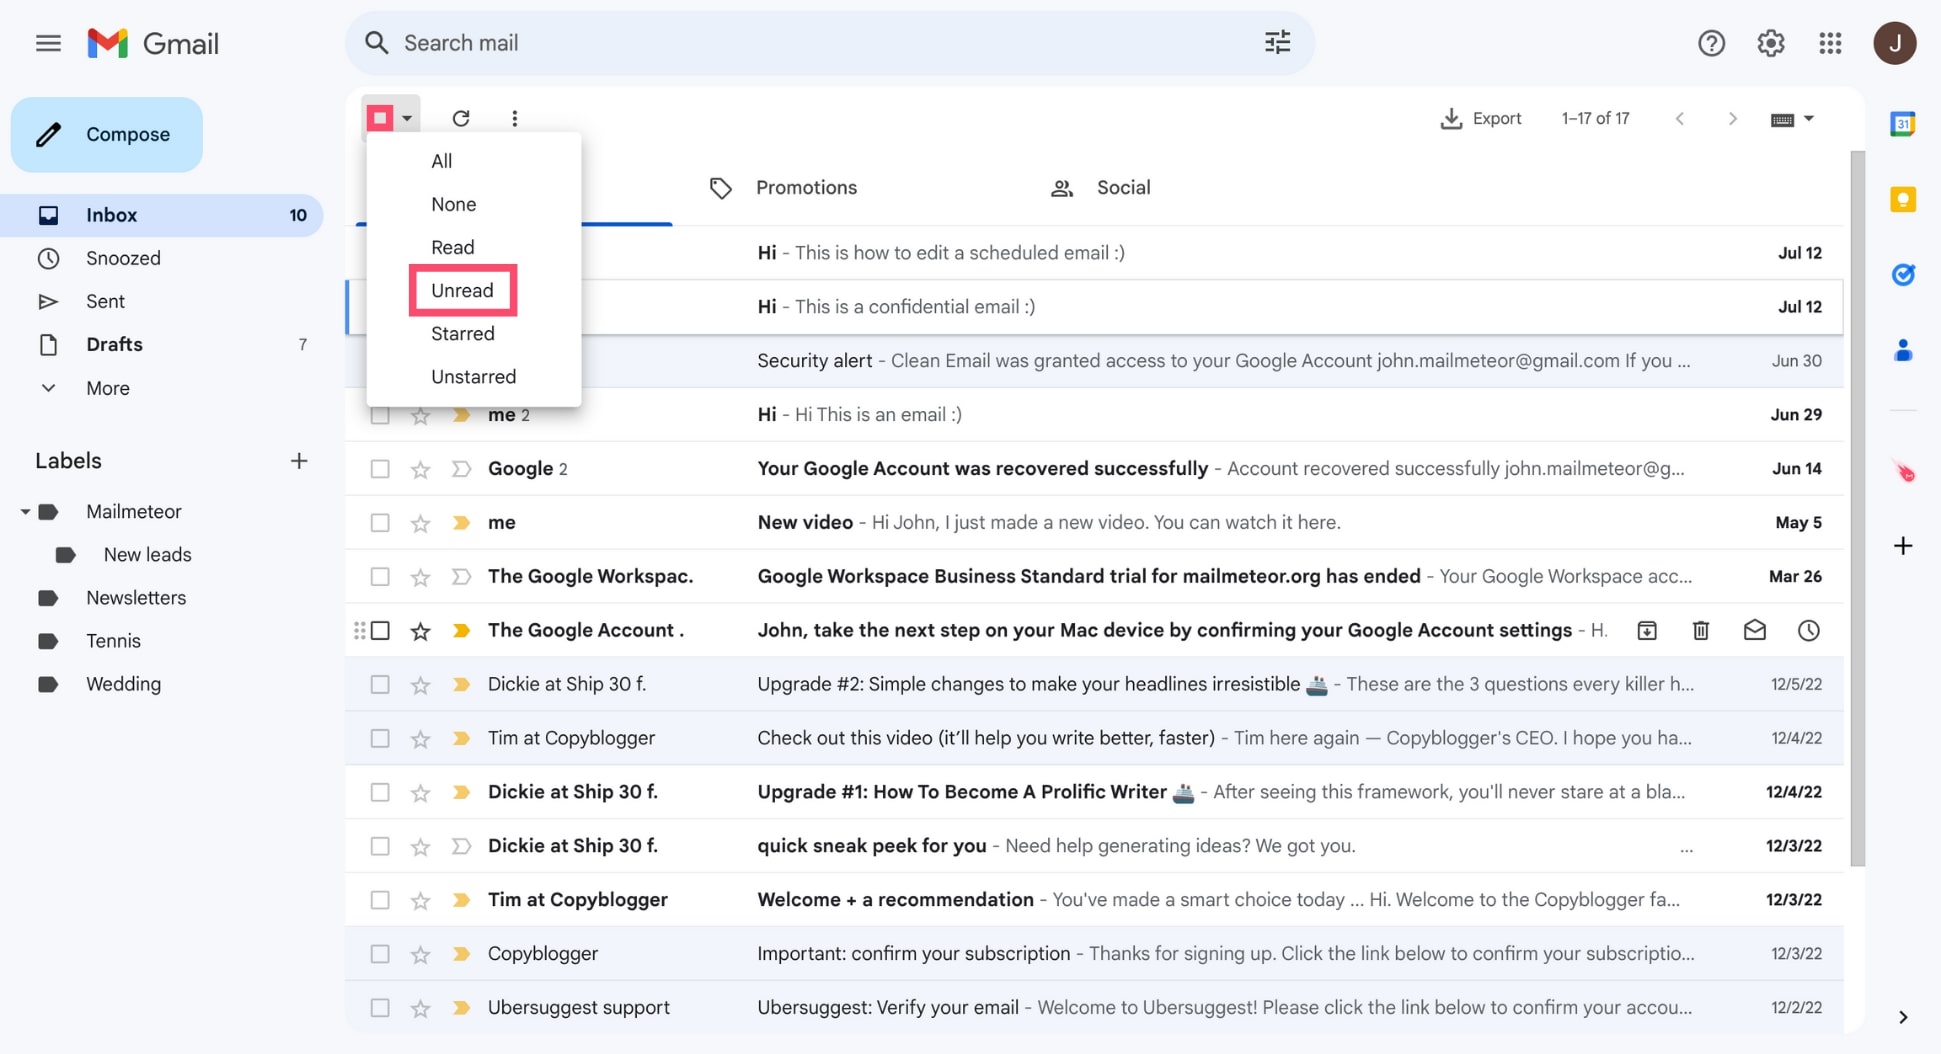 Select all your unread messages in Gmail